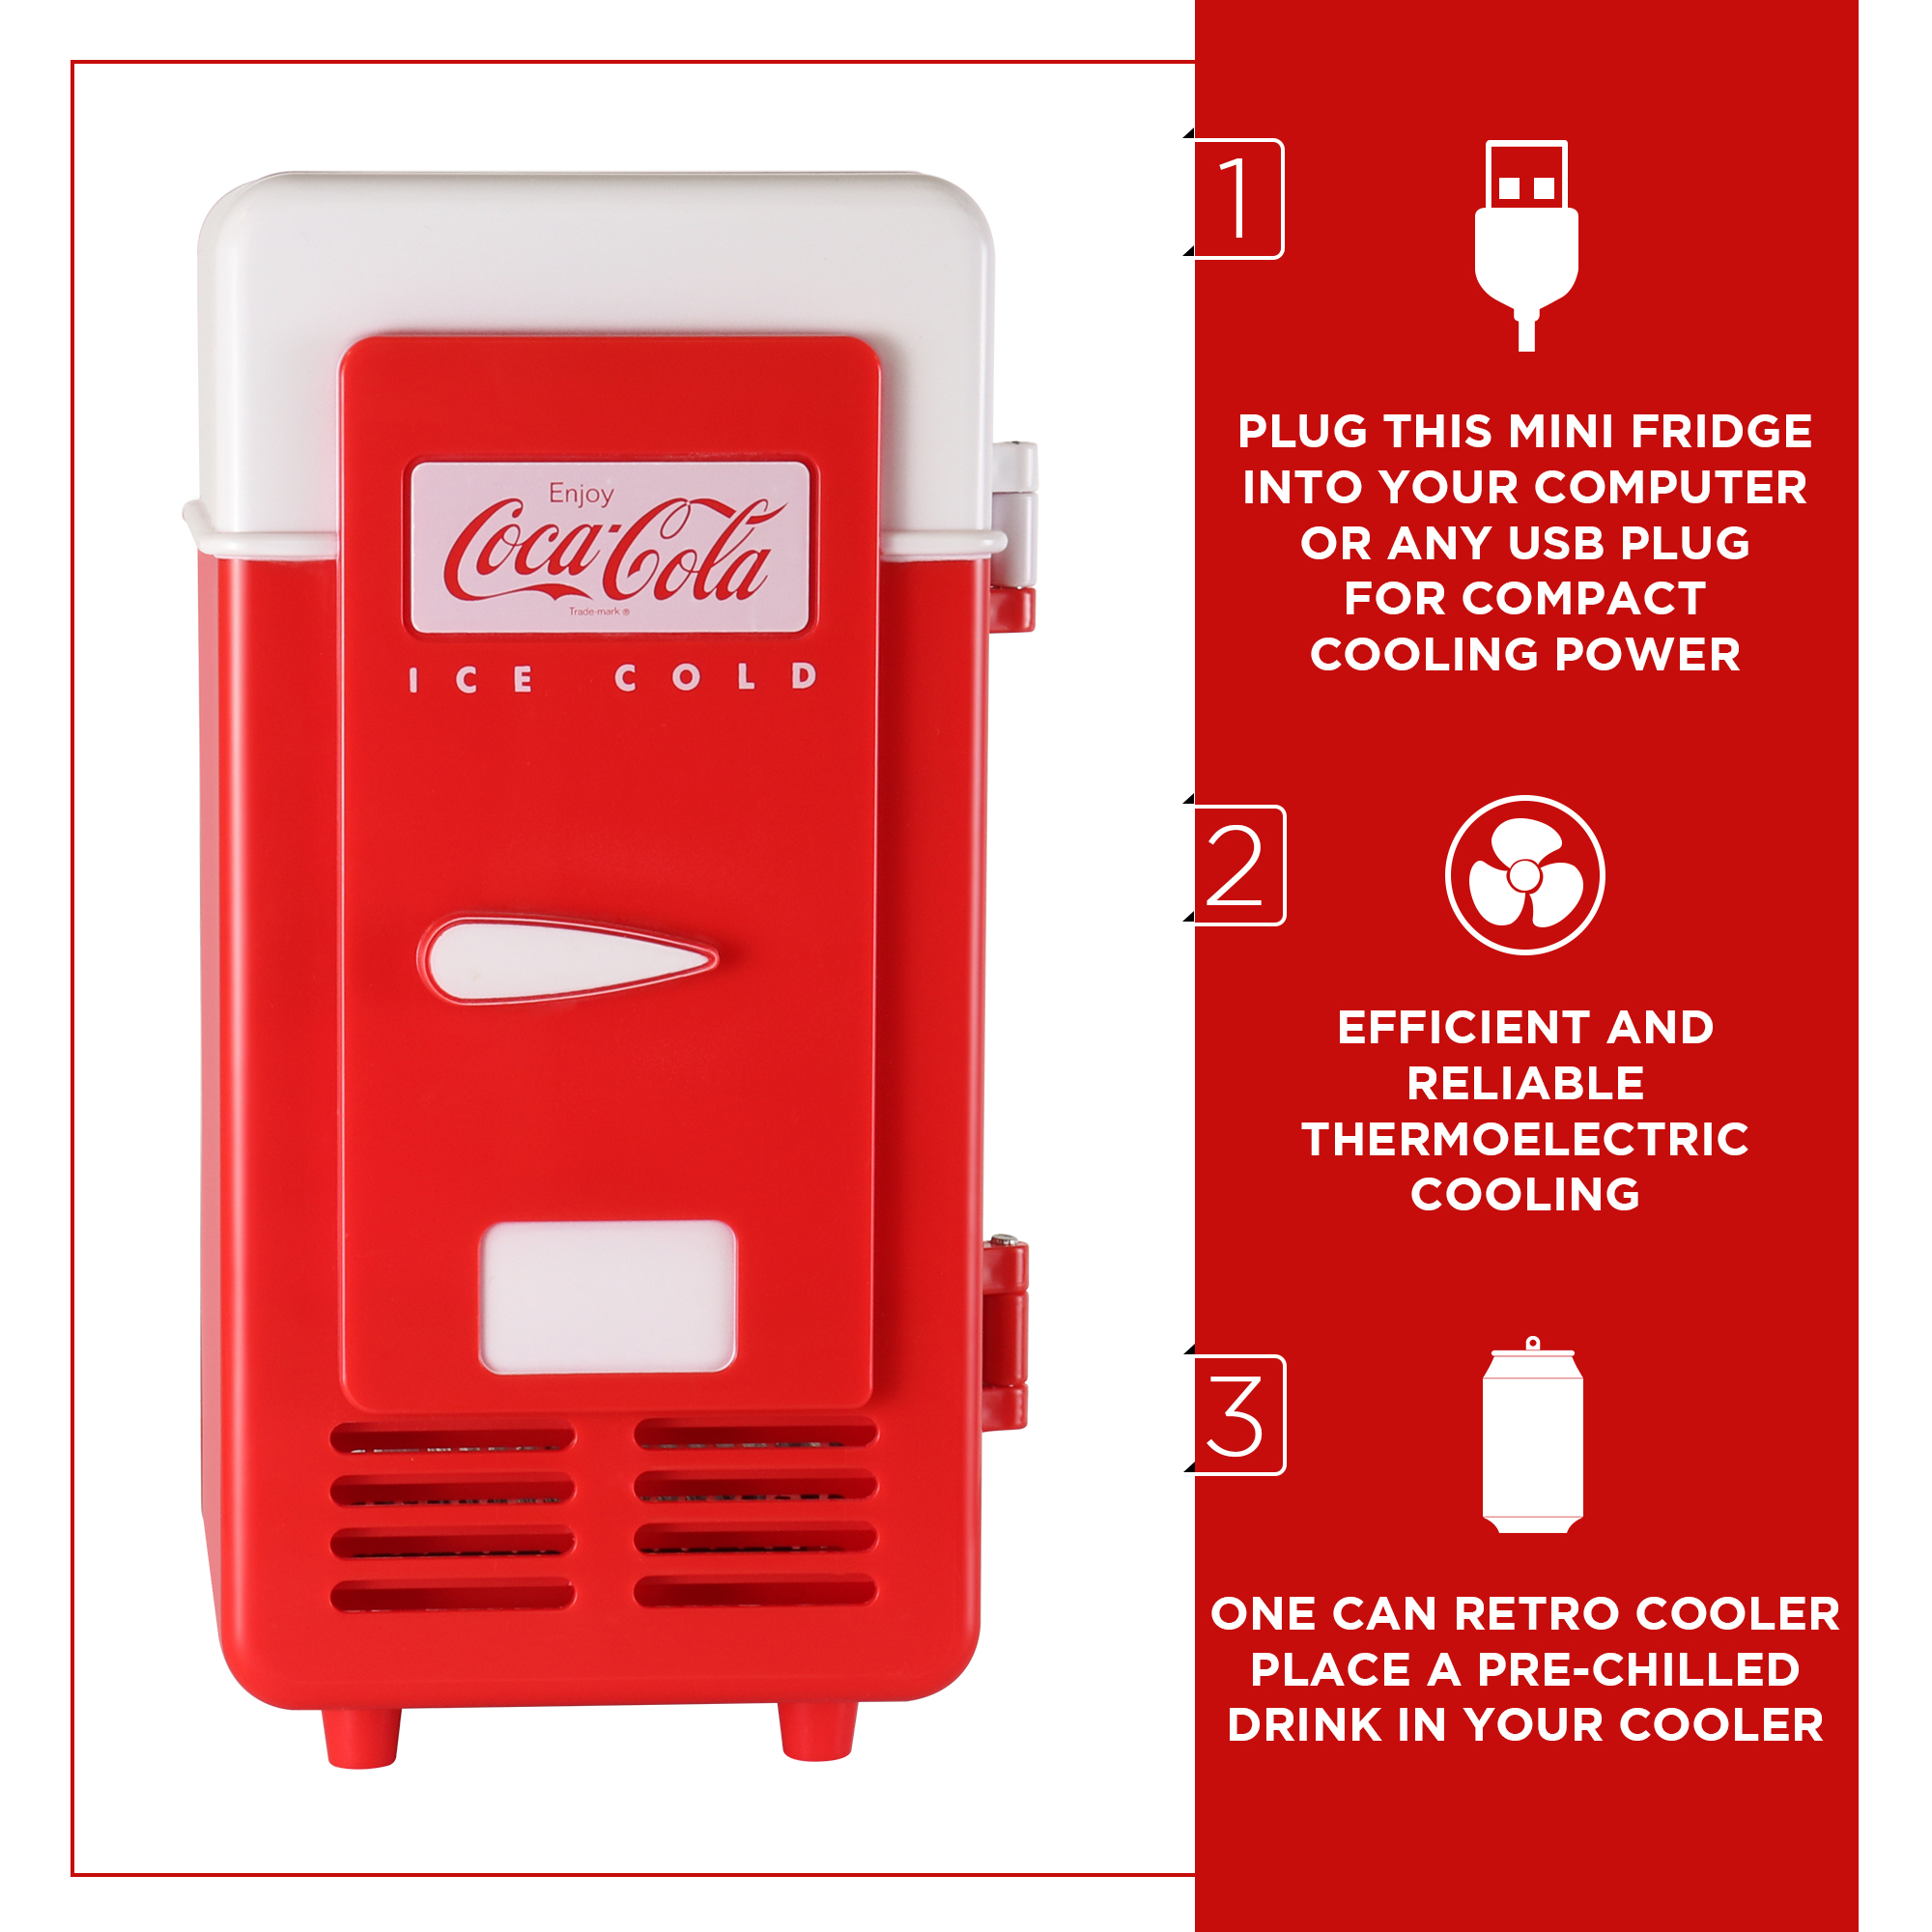 Coca-Cola Single Can Cooler, Red, USB Powered Retro One Can Mini Fridge, Thermoelectric Cooler for Desk, Home, Office, Dorm, Unique Gift for Students or Office Workers - image 4 of 5